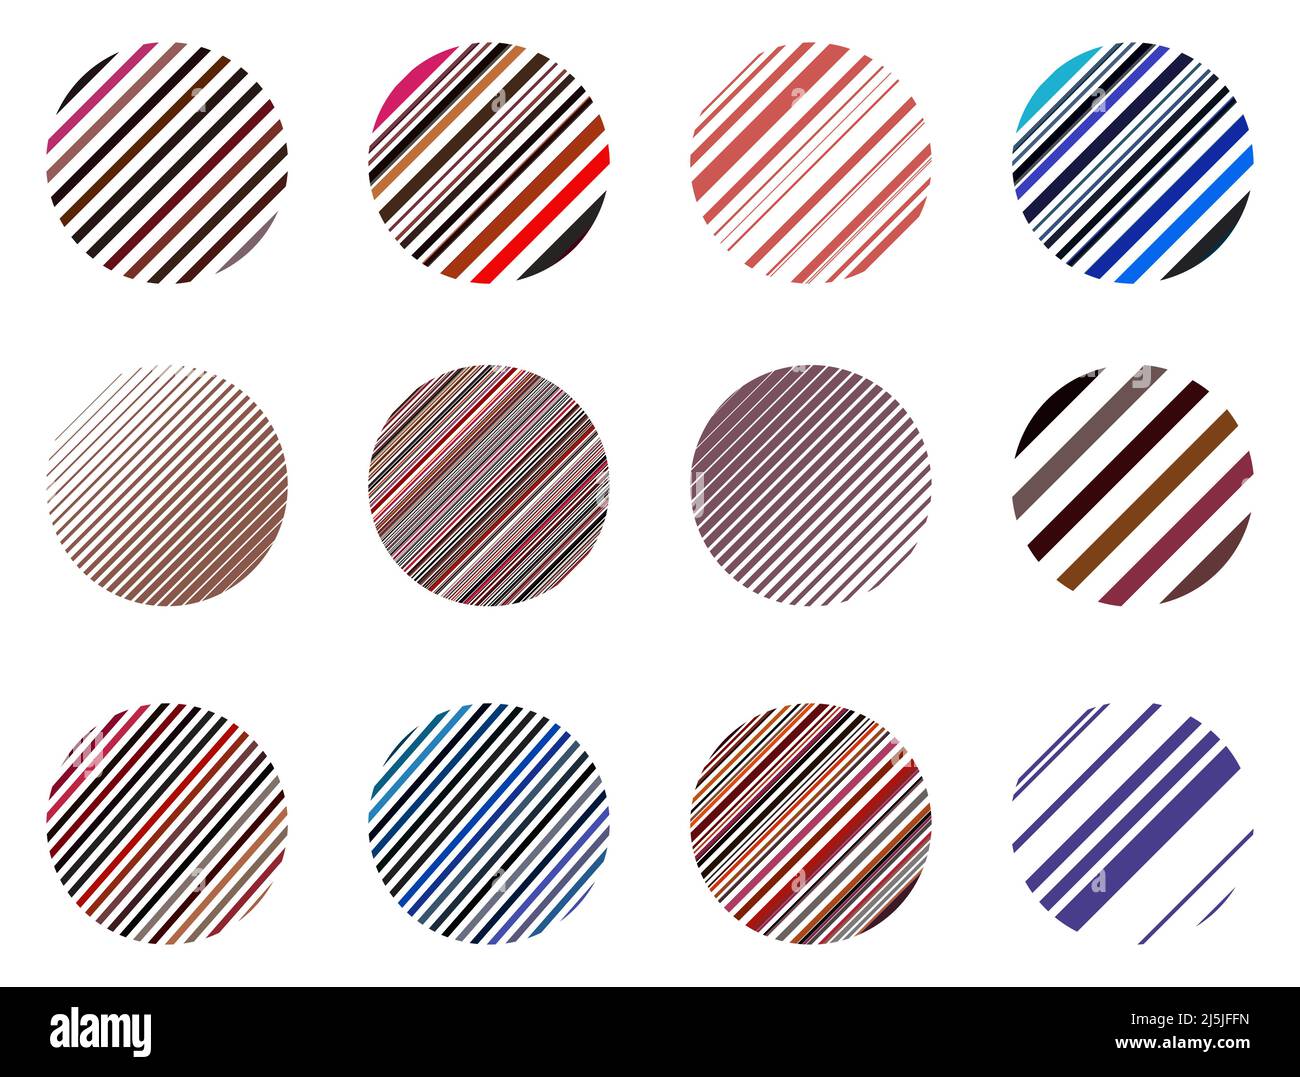 Colorful circle shaped stripes vector element set Stock Vector